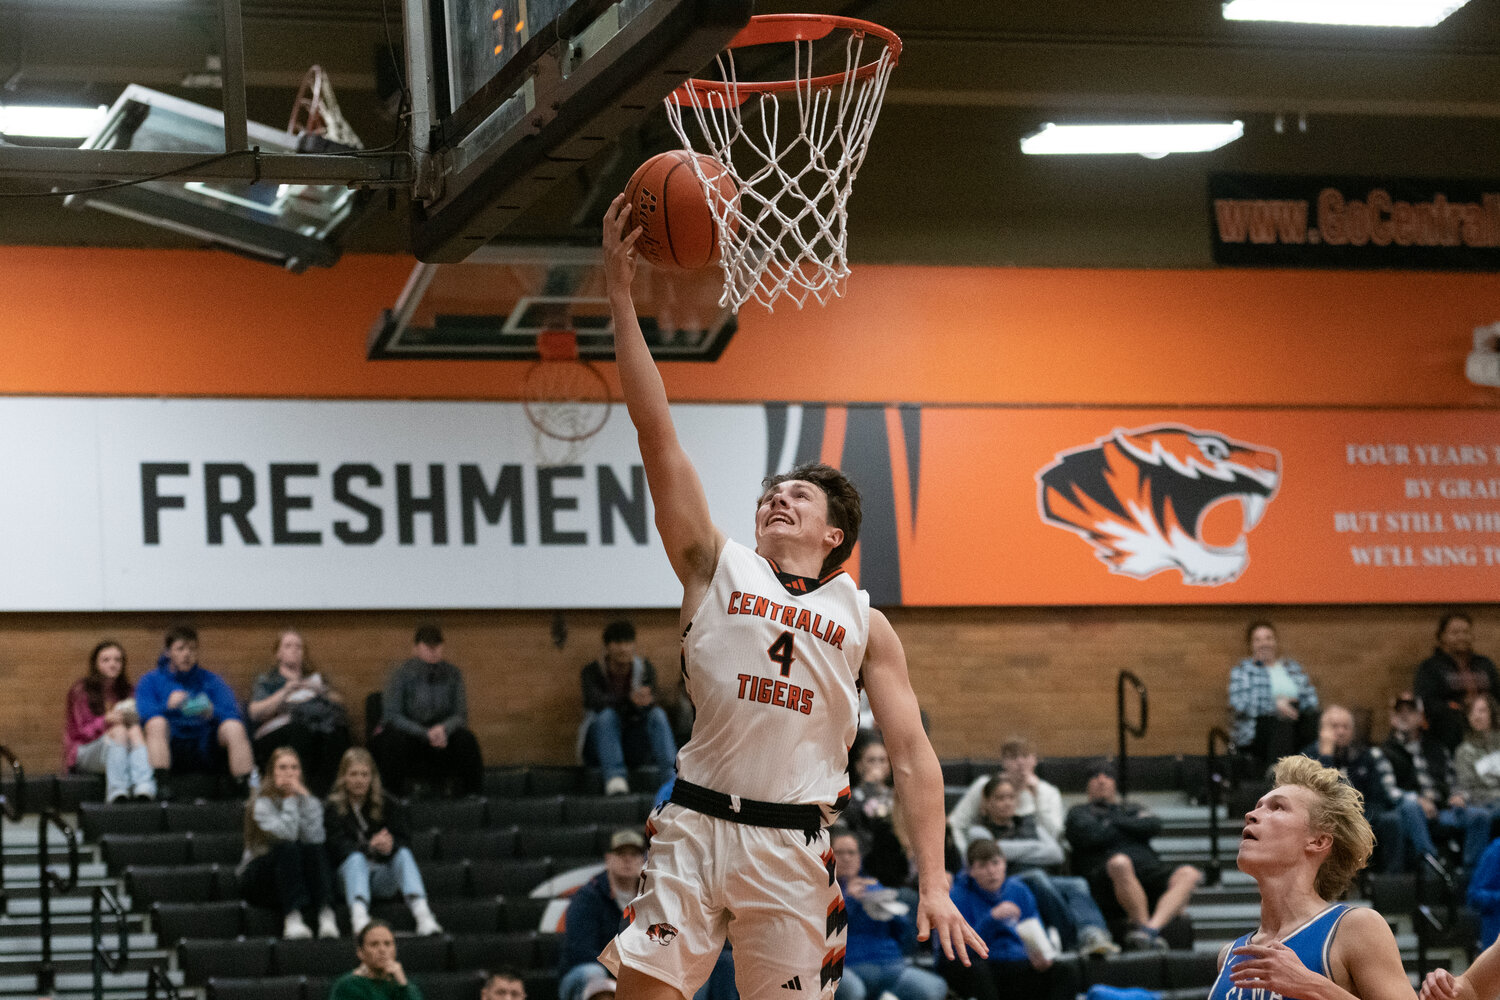 Aidan Haines goes up for two easy points during the first half of Centralia's 64-60 loss to Elma on Dec. 4.